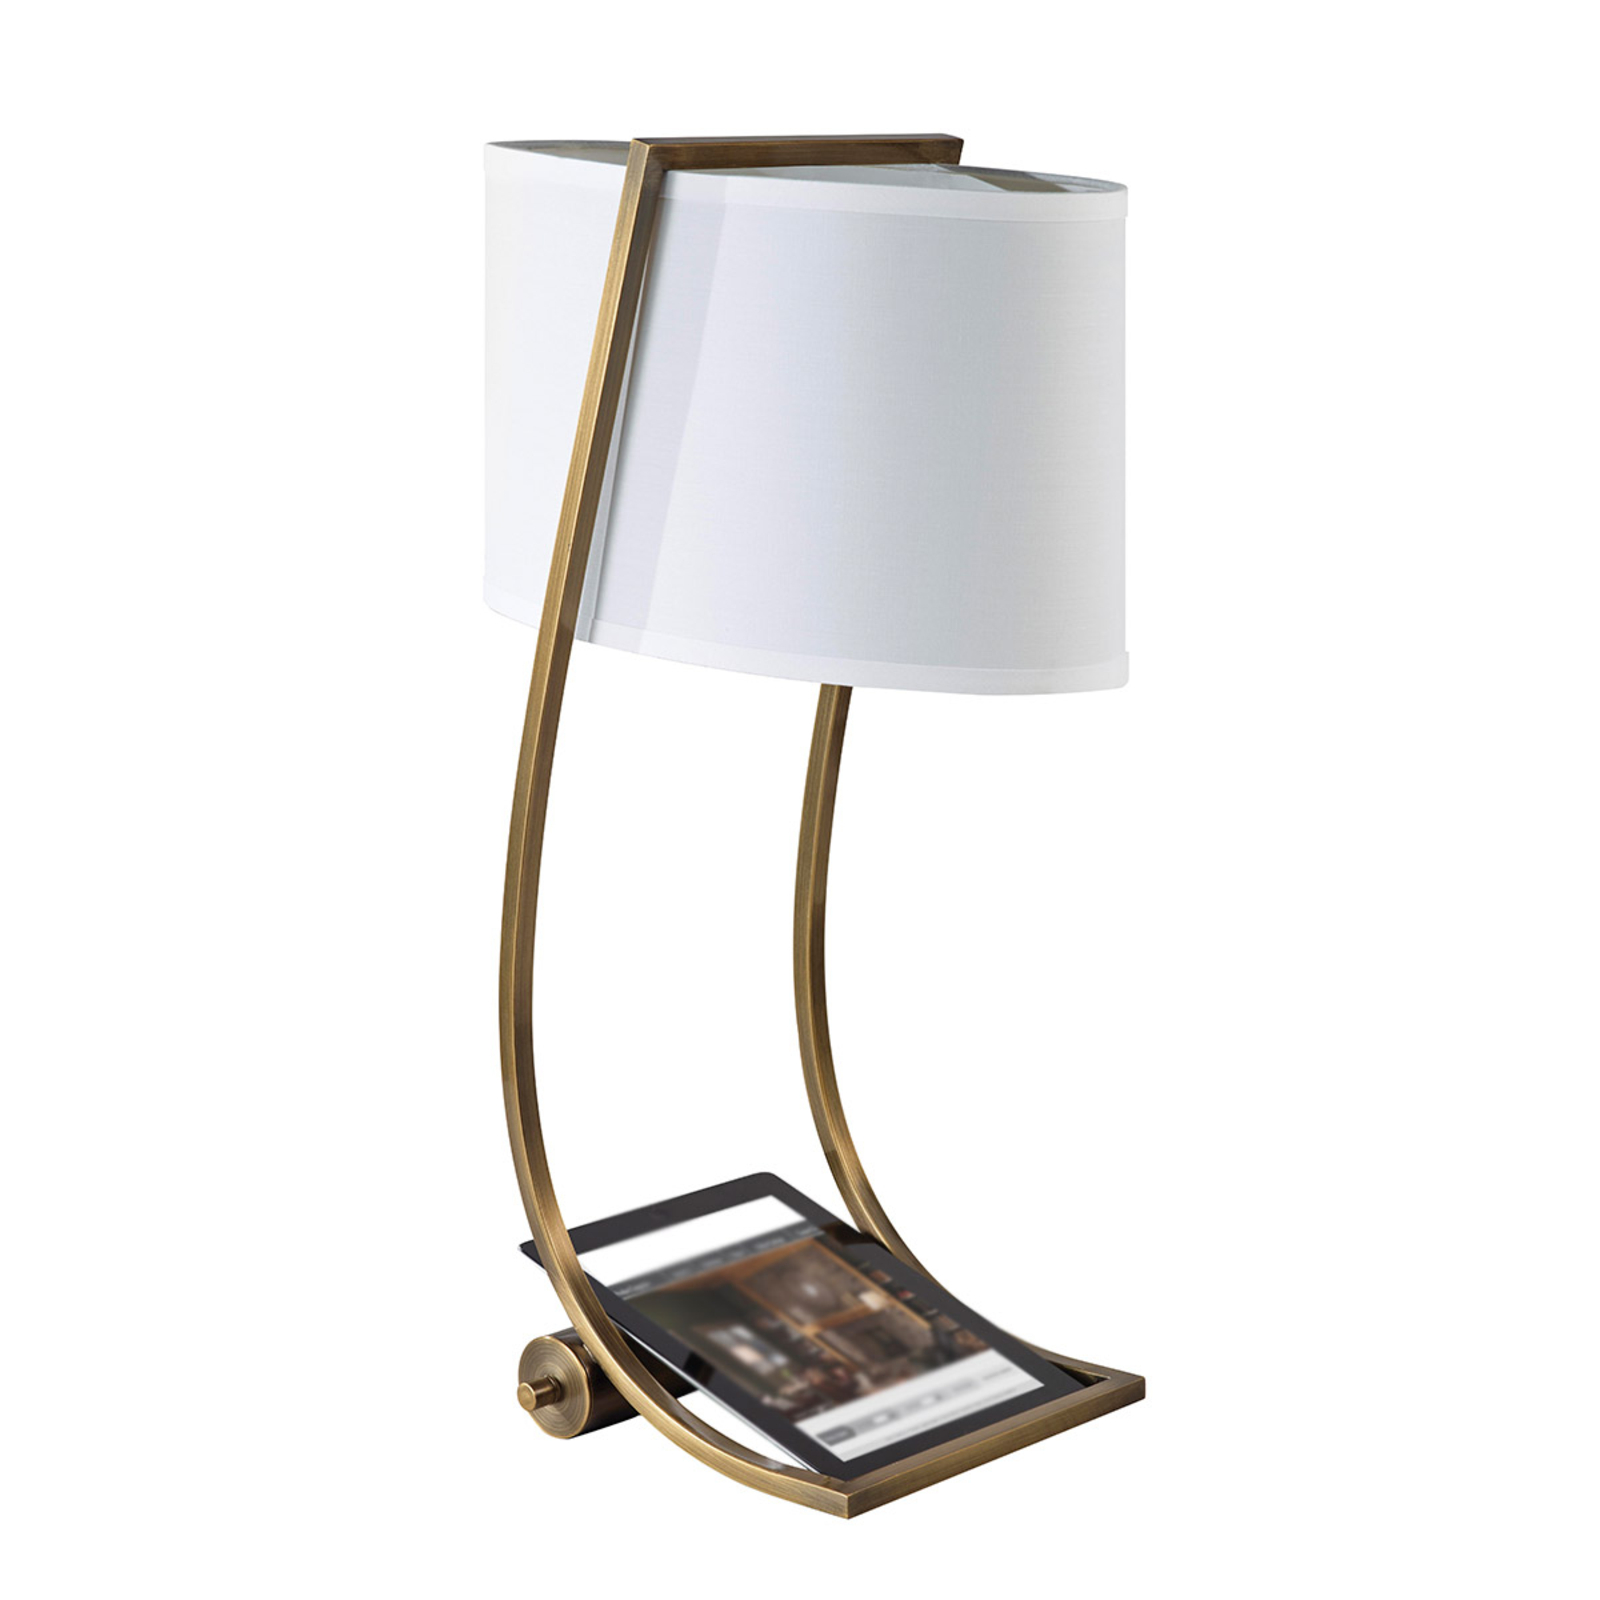 With USB port - fabric table lamp Lex brass